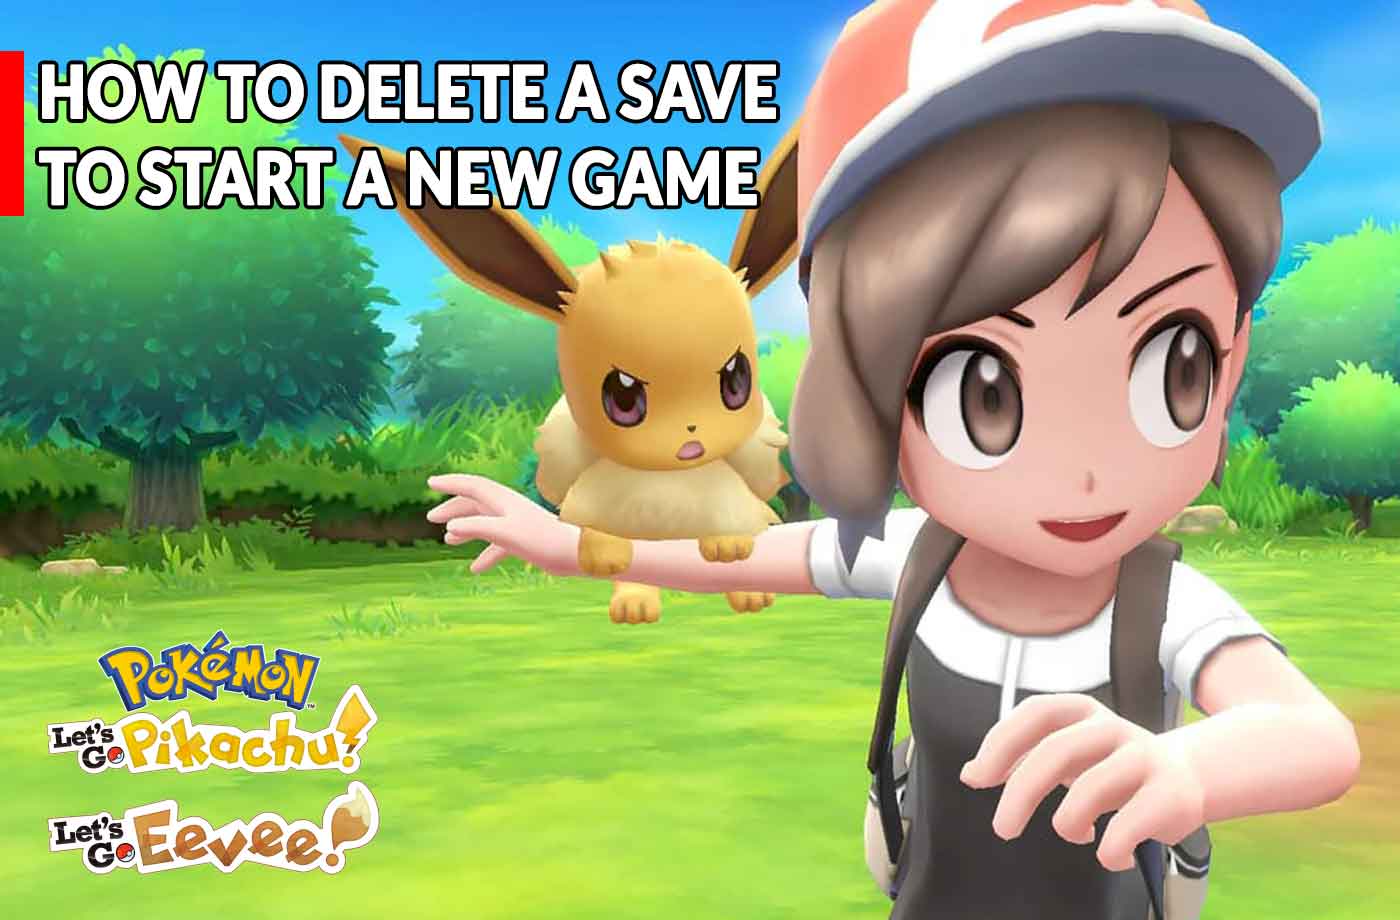 How To Save Pokemon Let's Go Pikachu